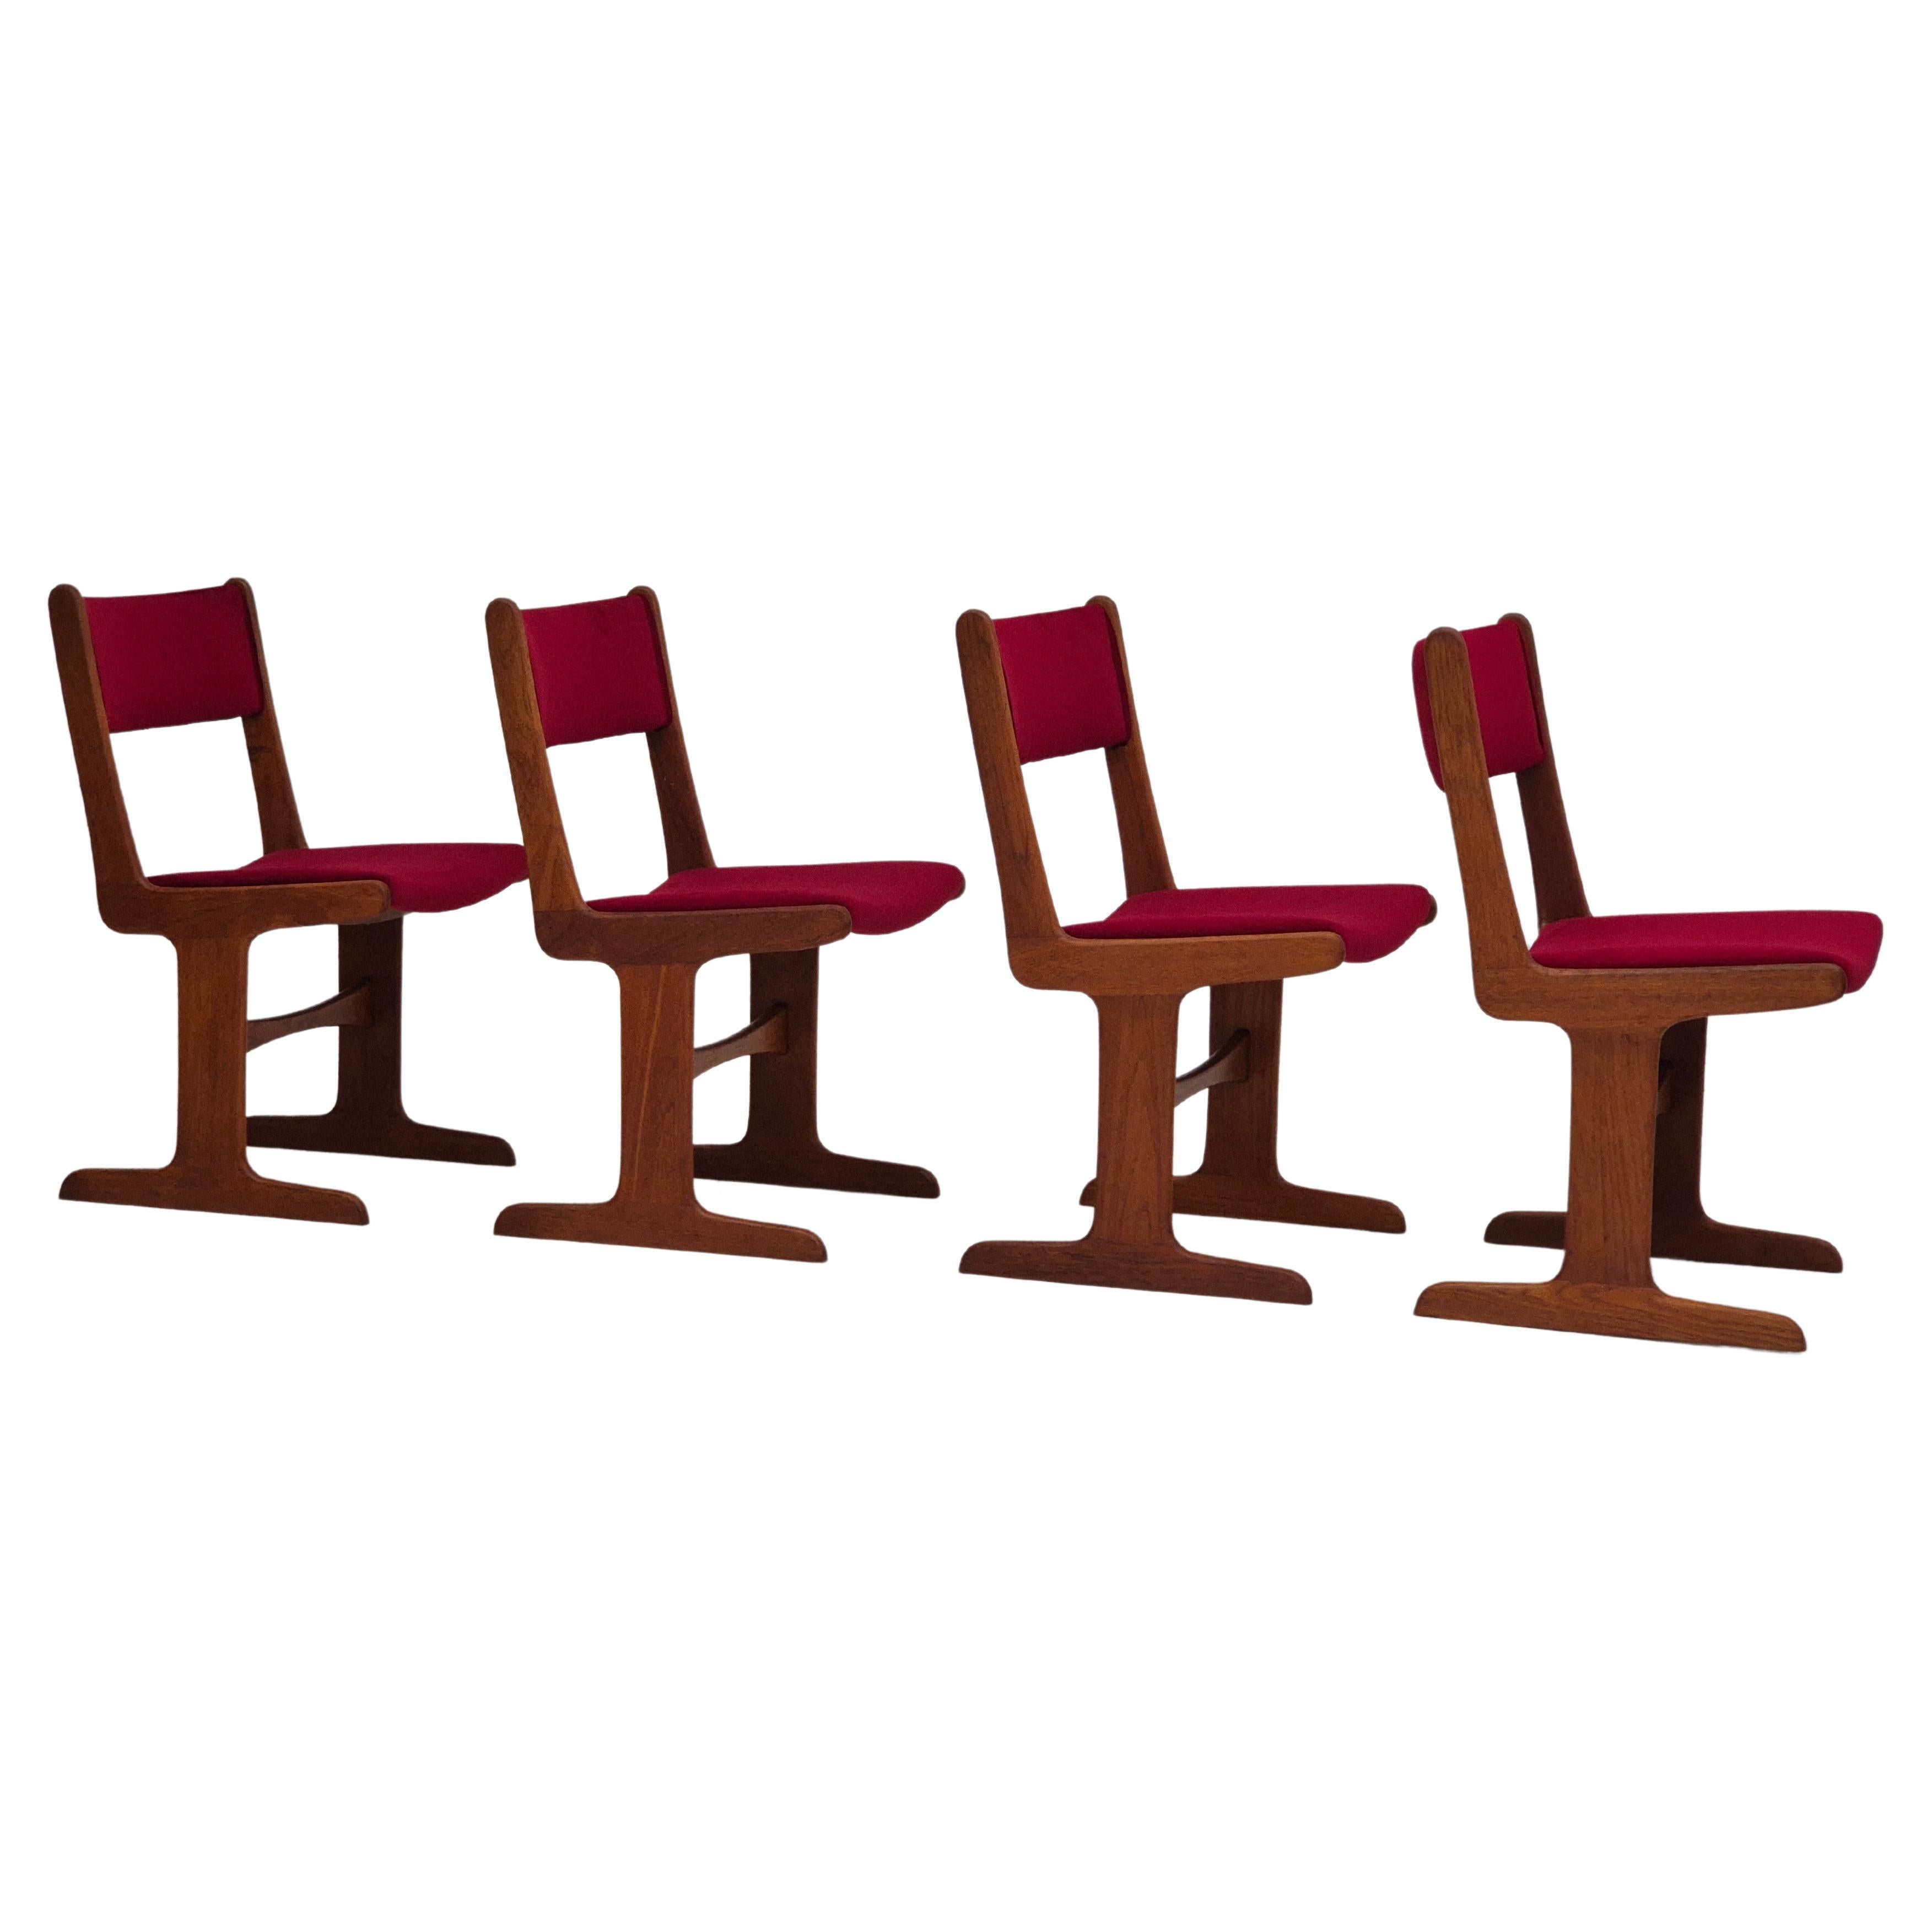 1970s, set of 4 reupholstered Danish chairs, teak wood, cherry-red velour. For Sale